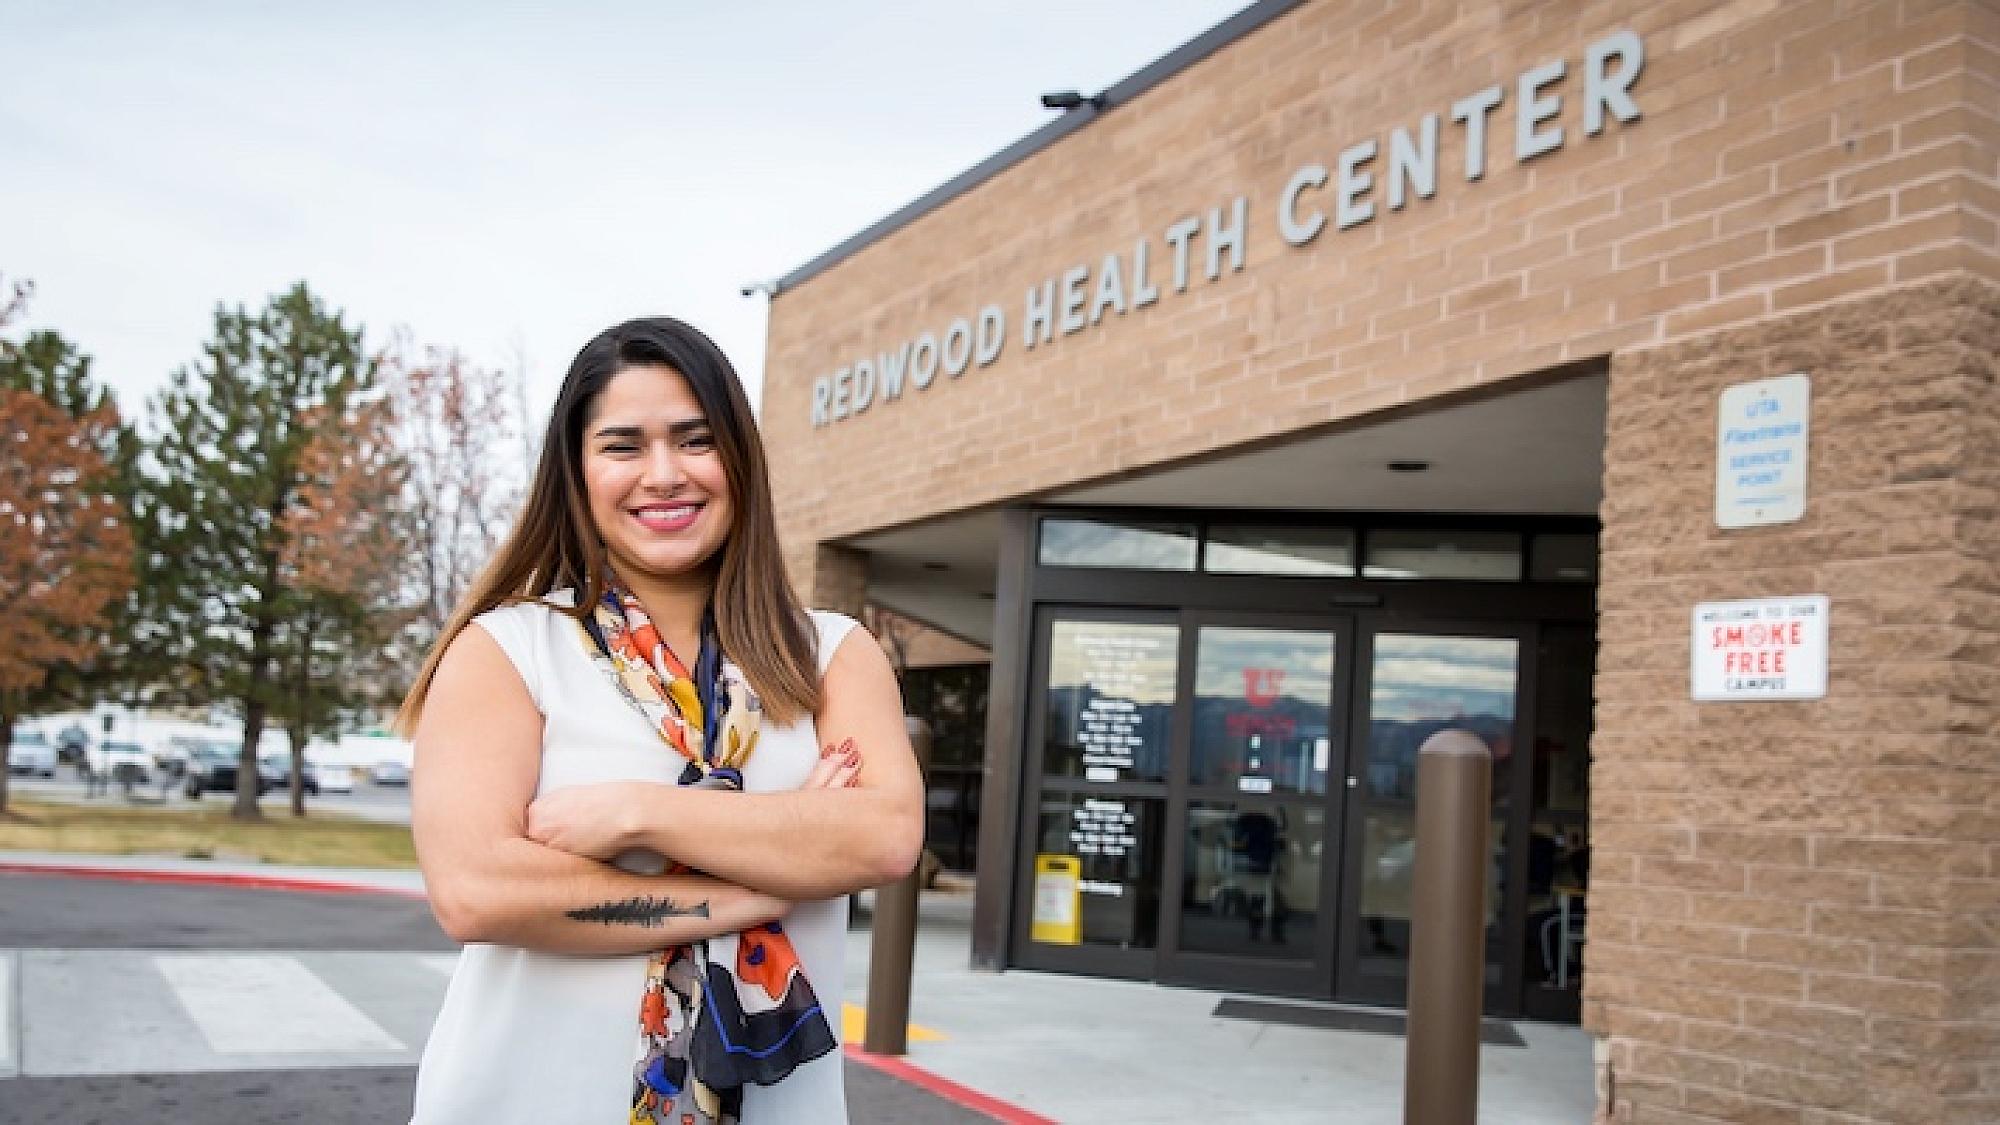 From the Amazon to Redwood Health Center